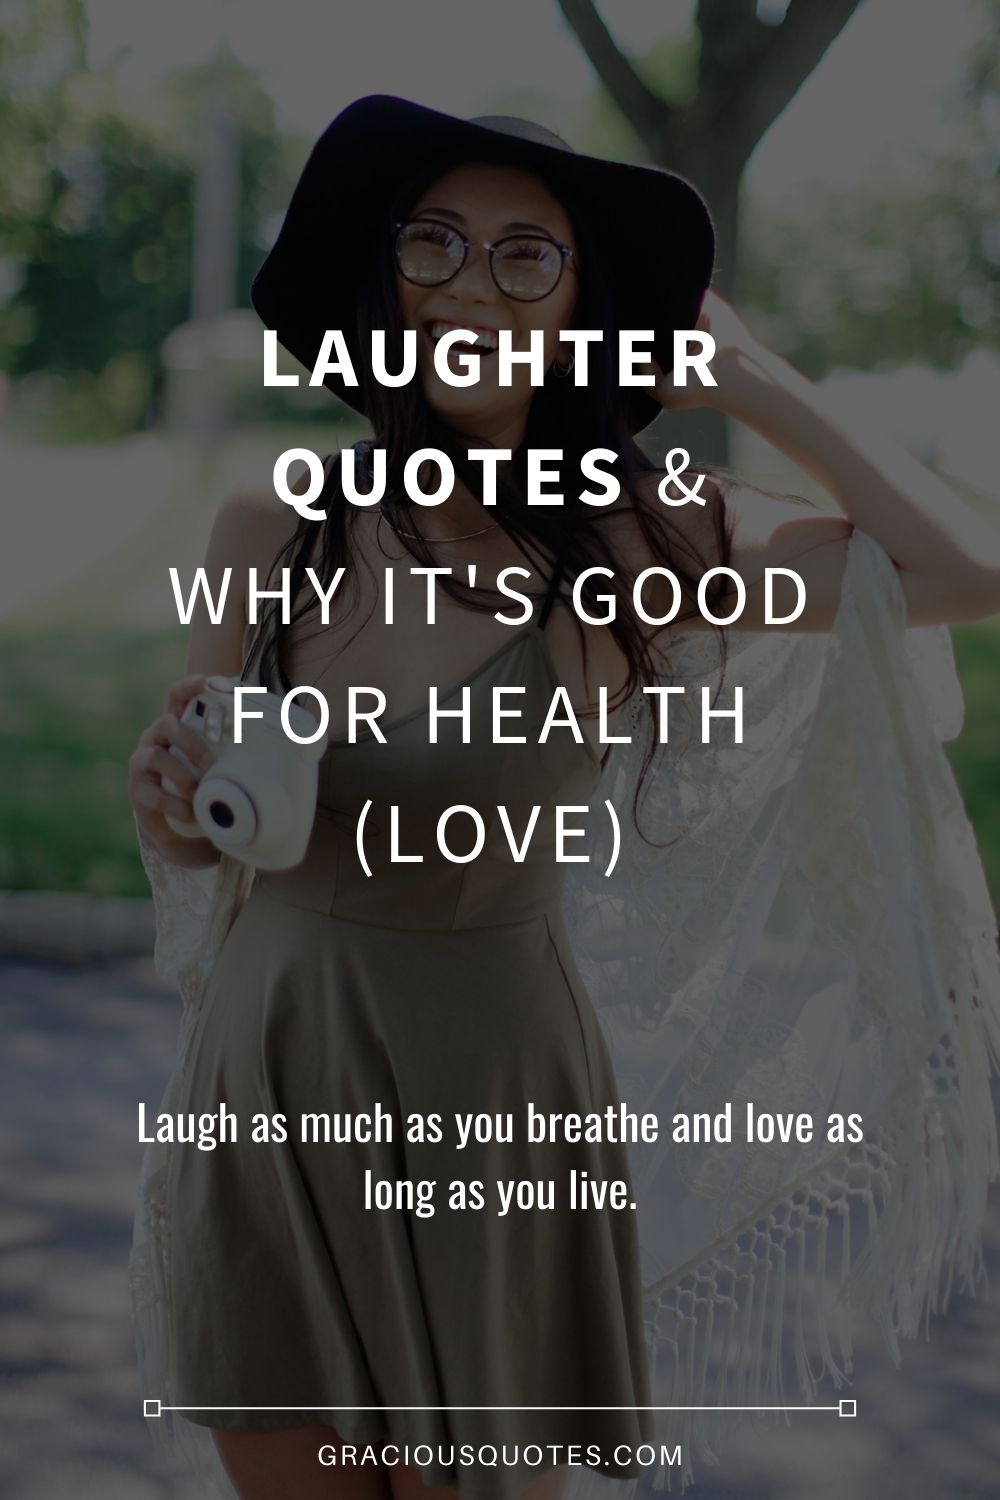 Laughter Quotes & Why It's Good for Health (LOVE) - Gracious Quotes